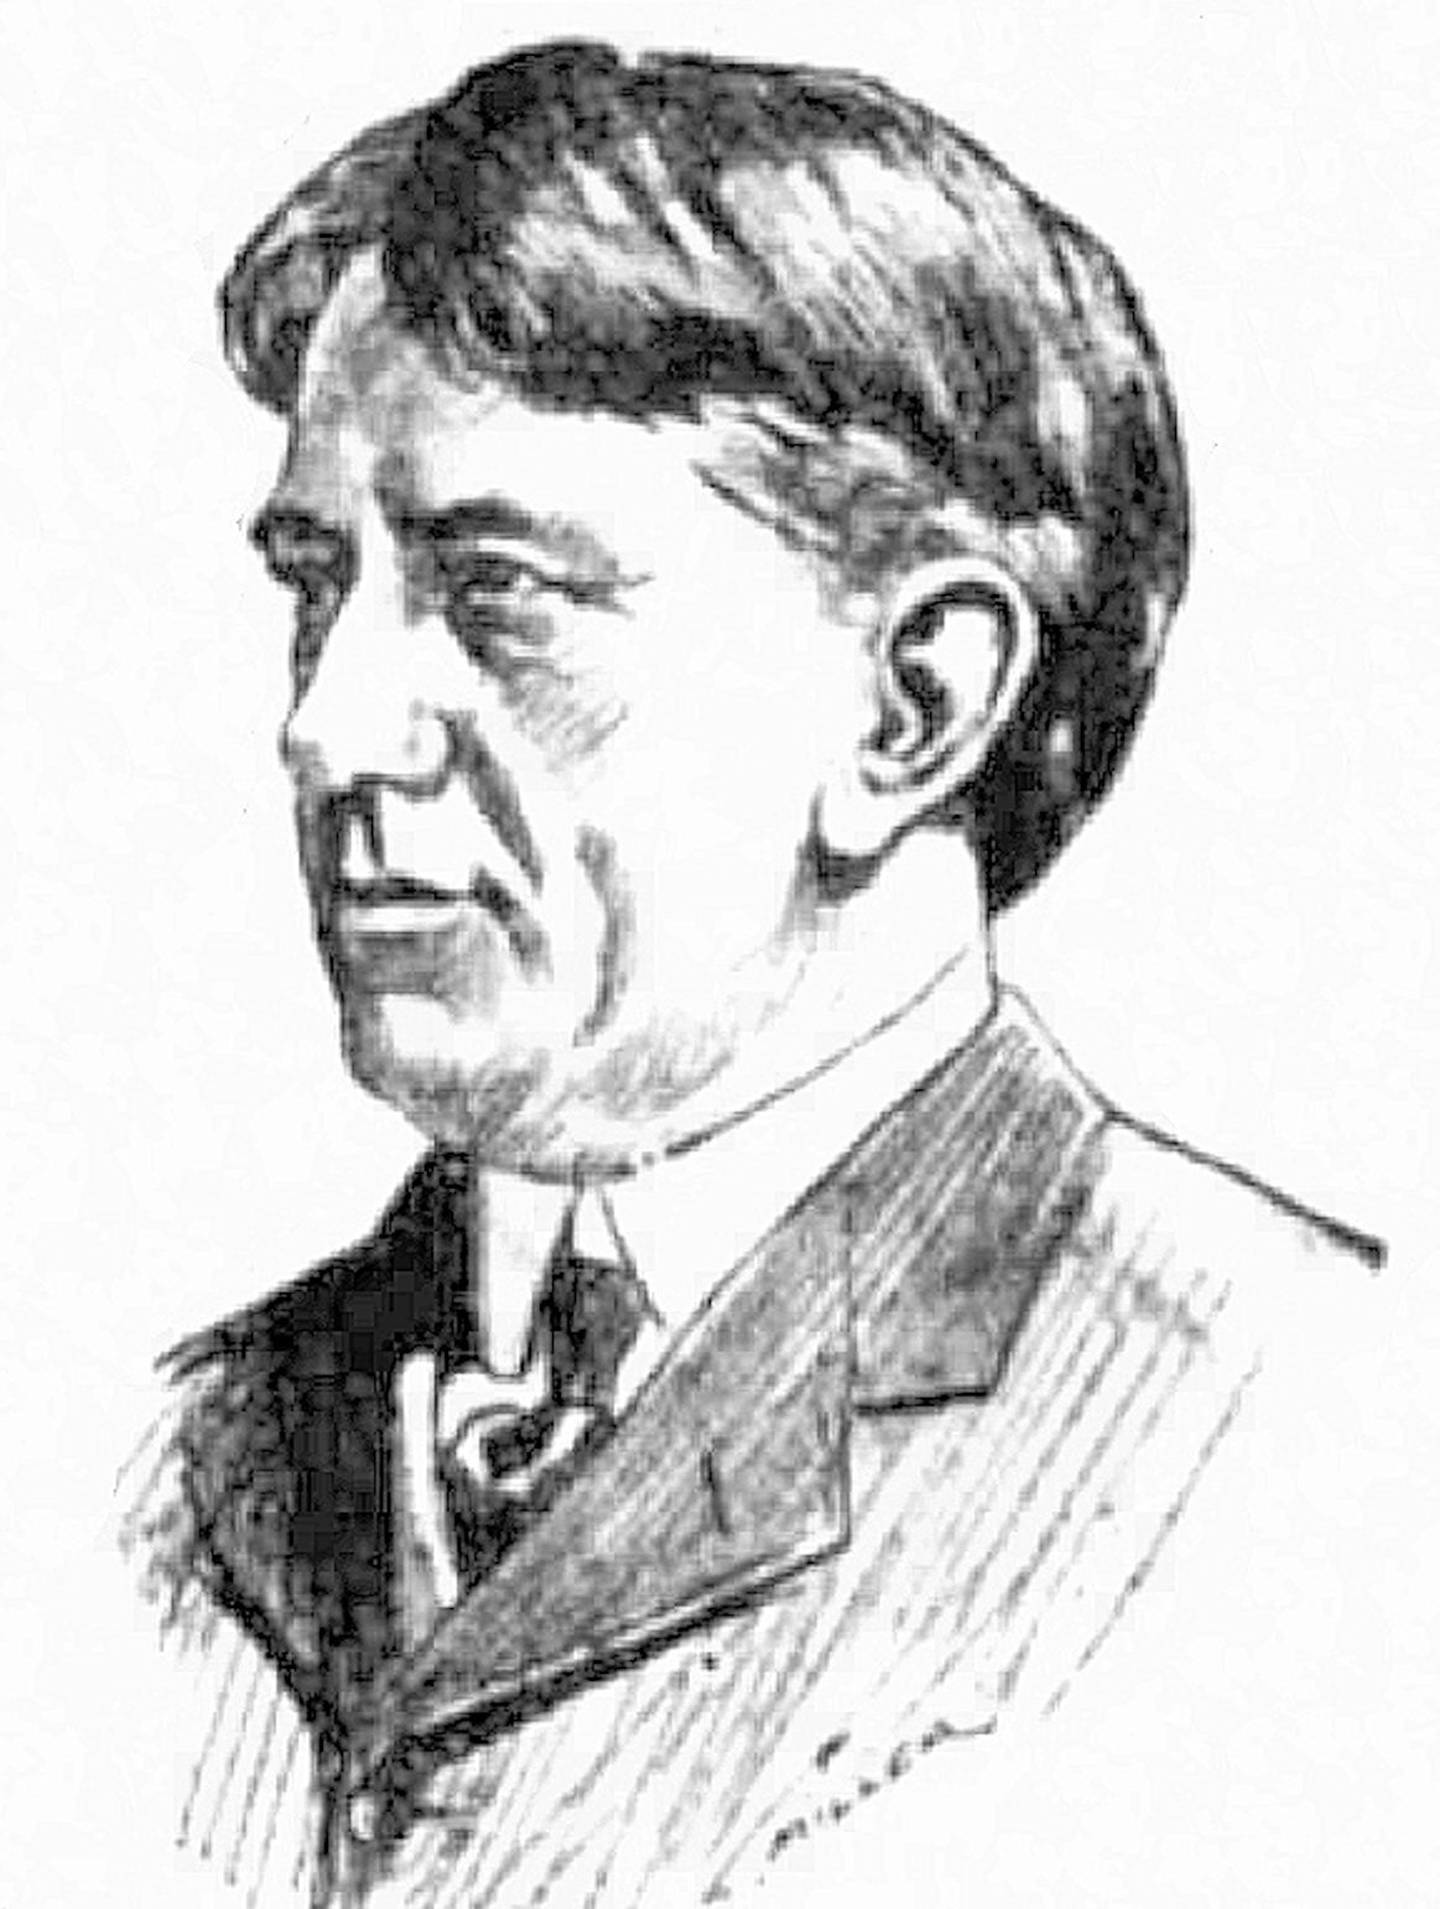 A drawing of William Brinton, probably etched during his years as Dixon mayor, 1911 to 1915.